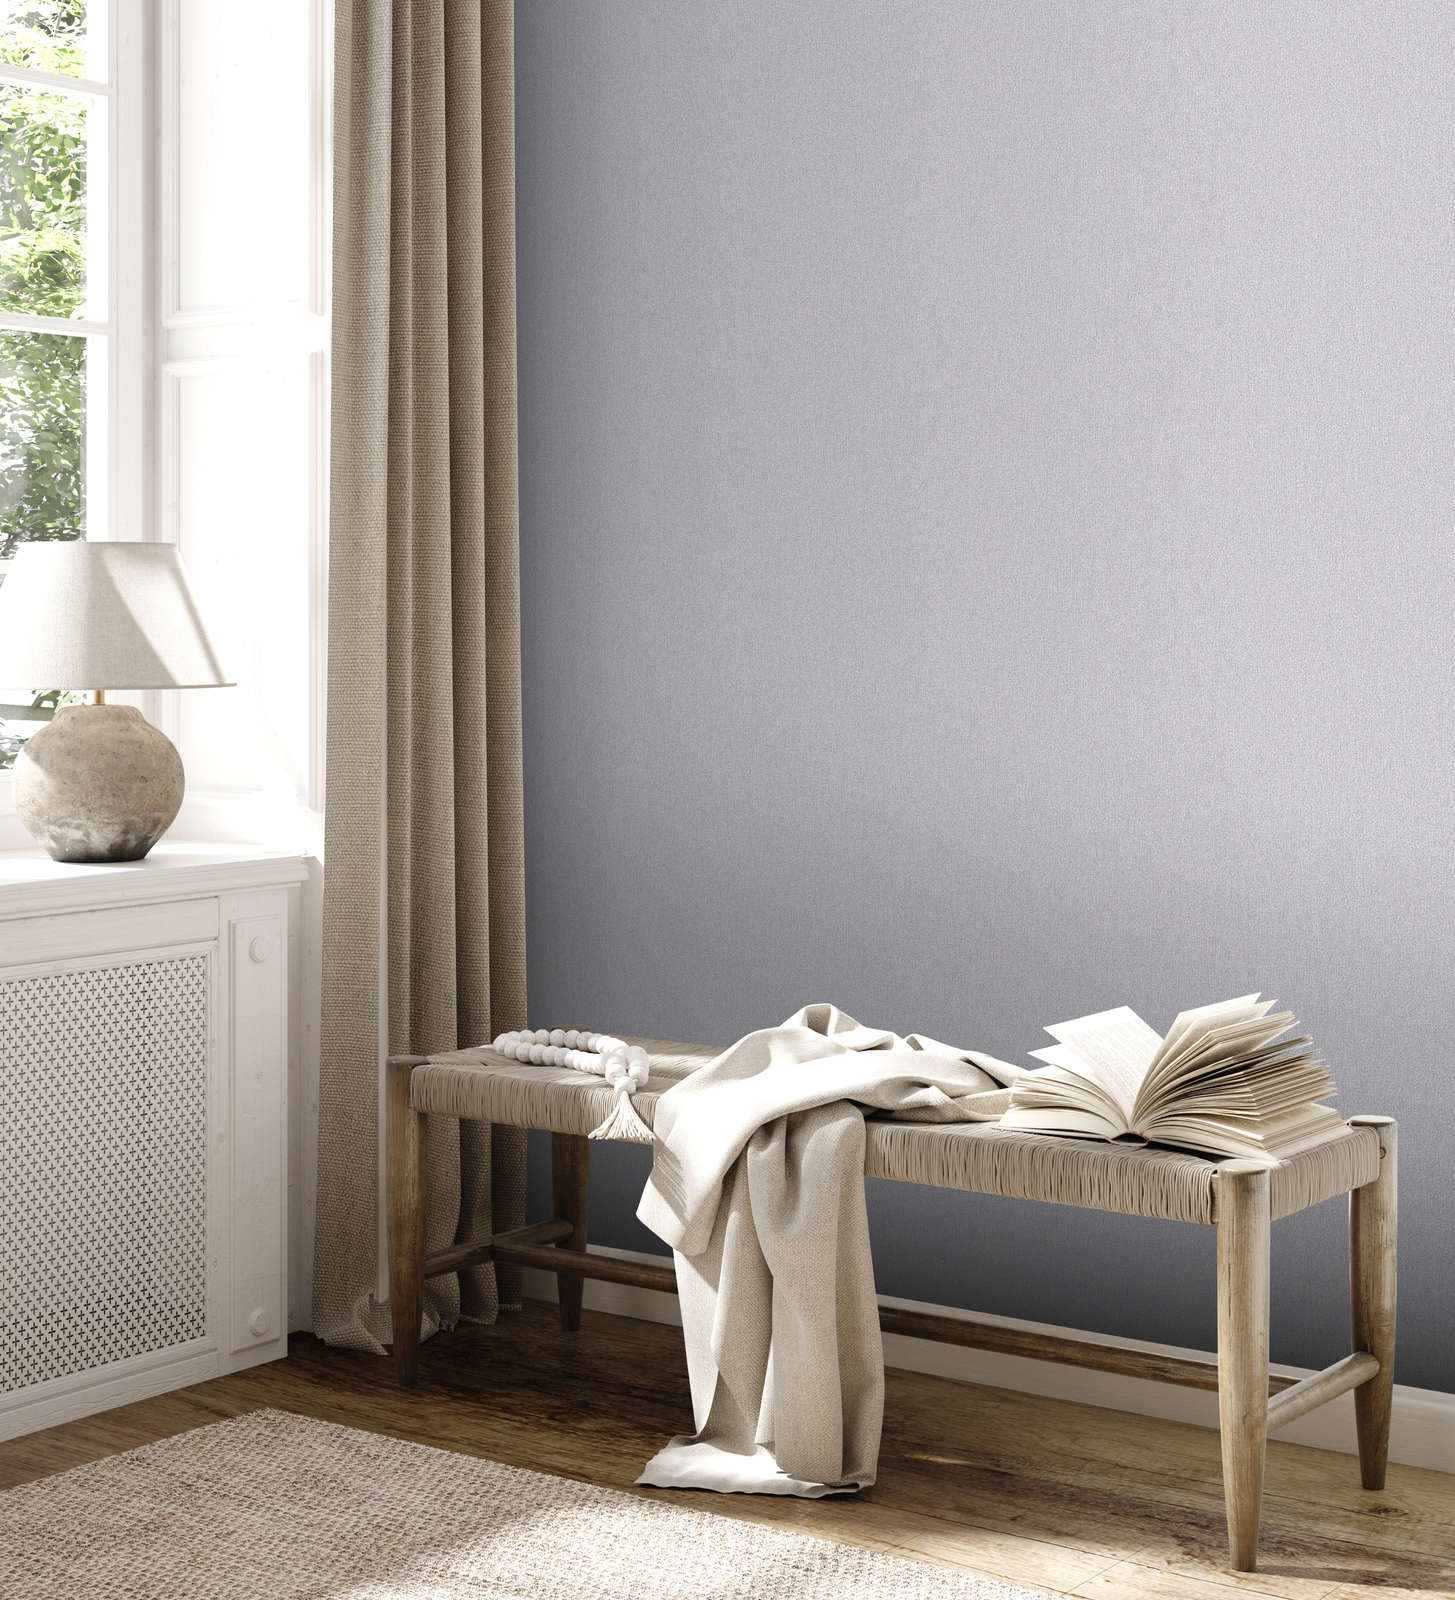             Wallpaper in non-woven with structure pattern and matt - light grey, grey
        